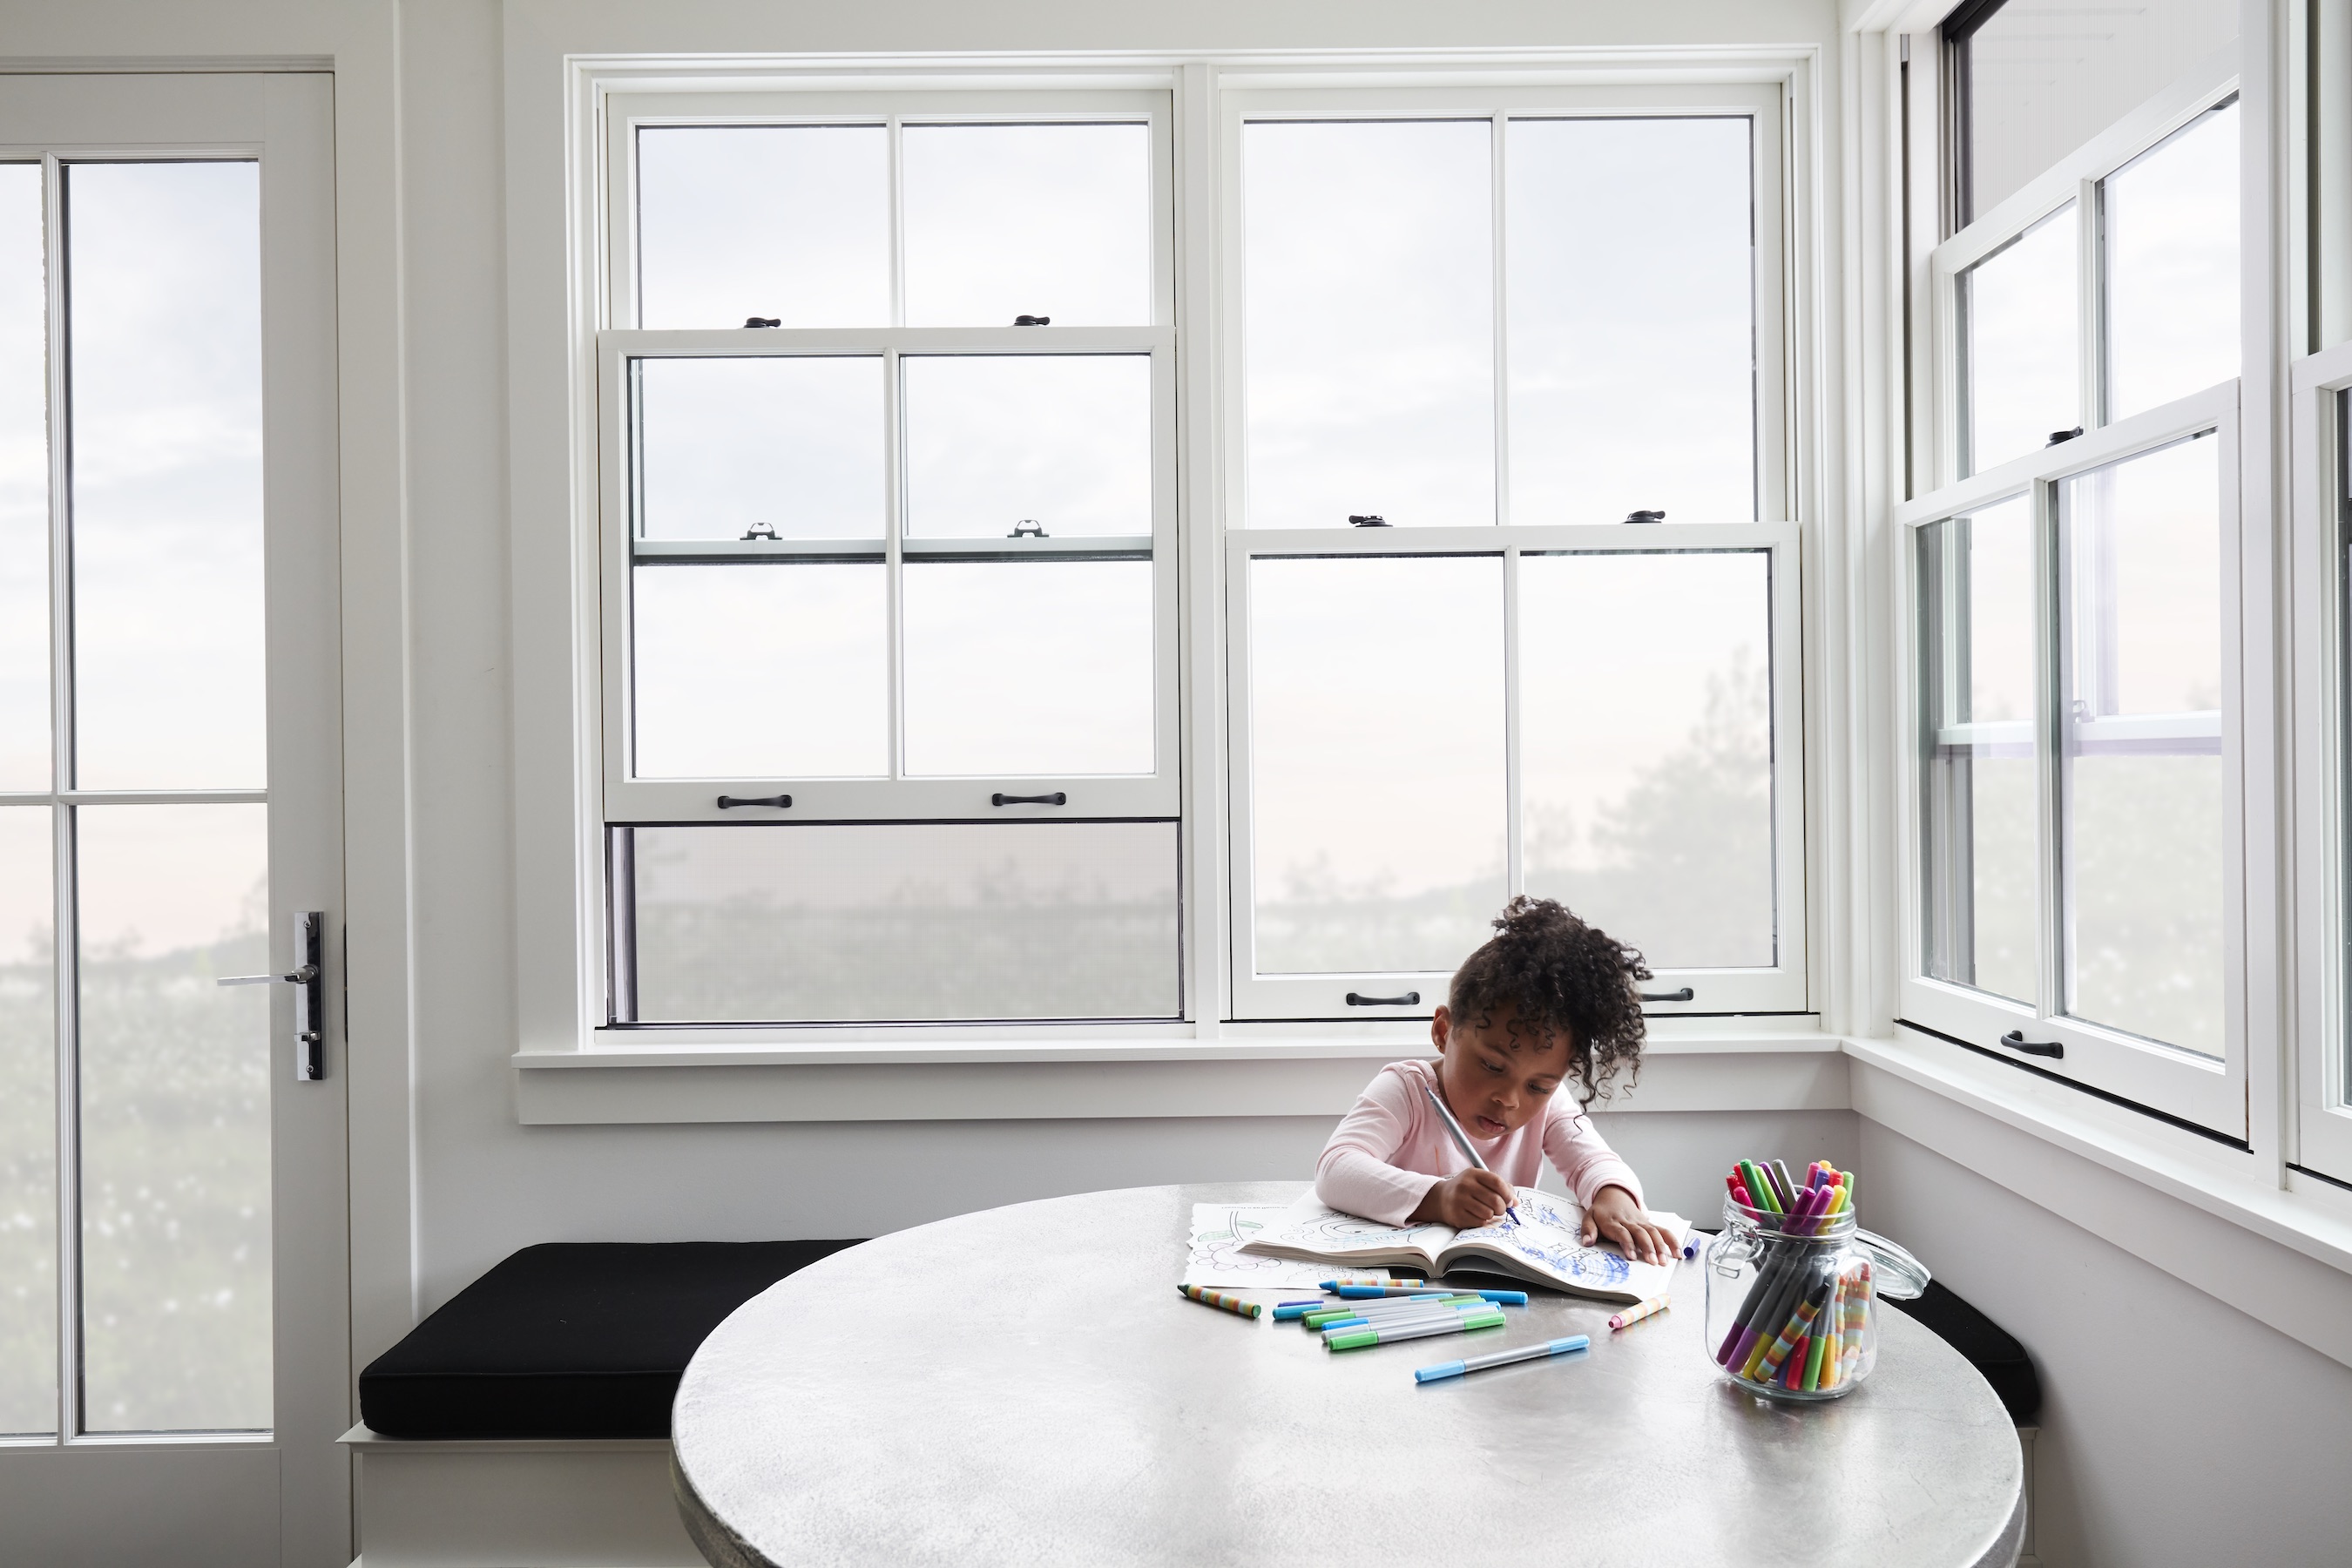 Pella Architect Series windows are the first line of windows to feature the Integrated Rolscreen. Architect Series windows are backed by the best Limited Lifetime Warranty.